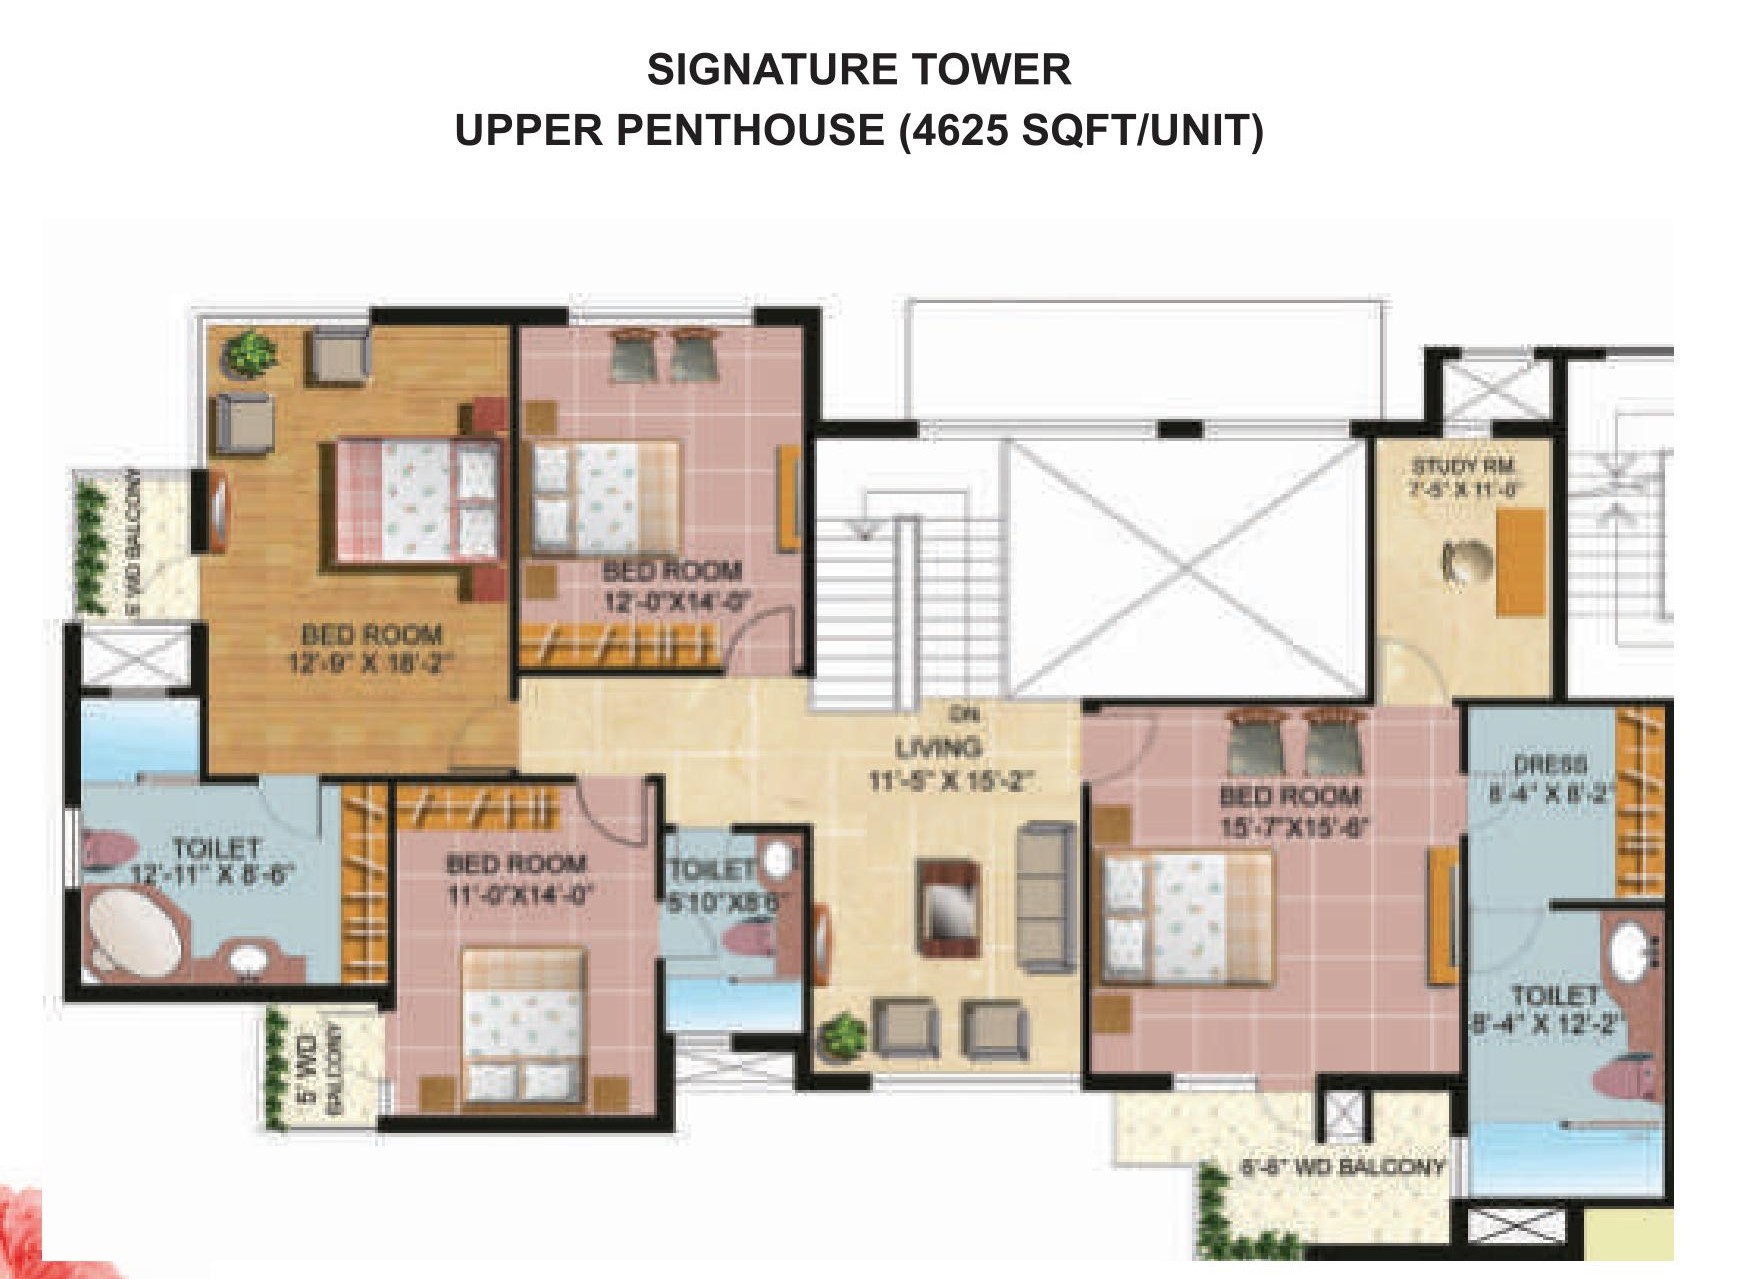 Signature Tower Upper Penthouse